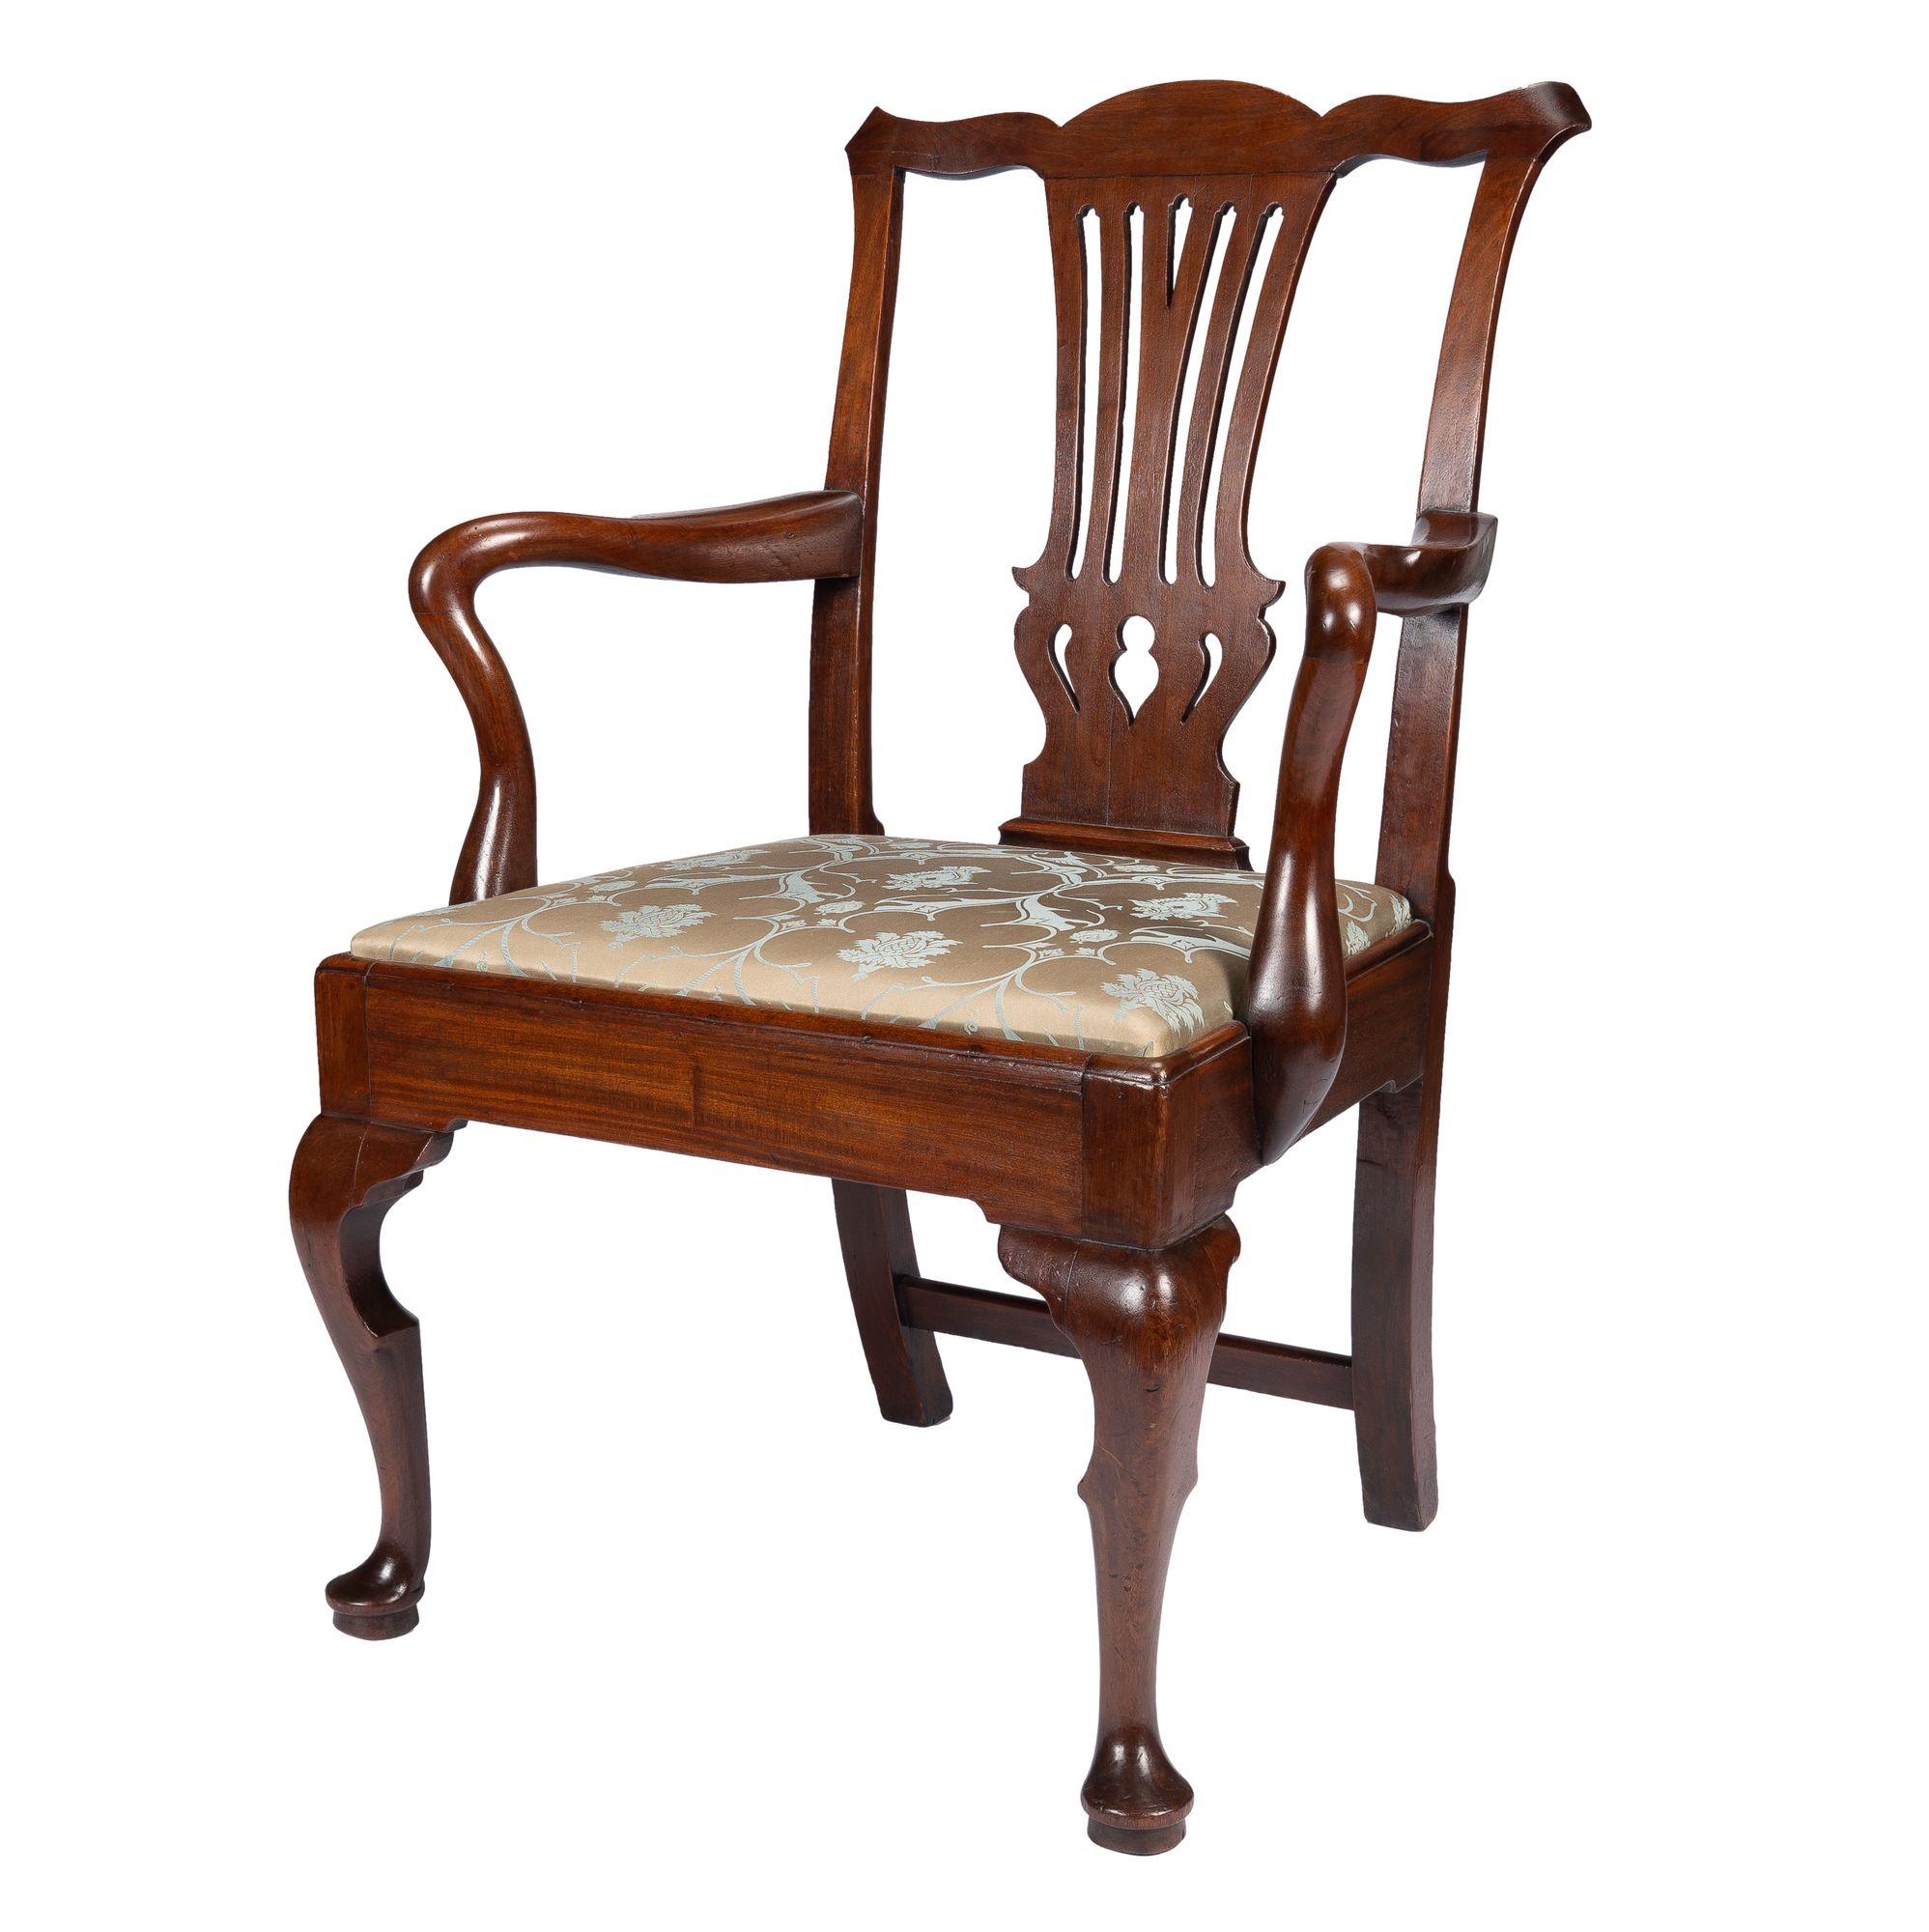 George II shepherd's crook armchair in old-growth mahogany. The pierced back splat is framed between the cupid’s bow crest rail with scroll carved ears and the slip seat shoe. The front cabriole legs terminate in pad feet and the splayed rear legs